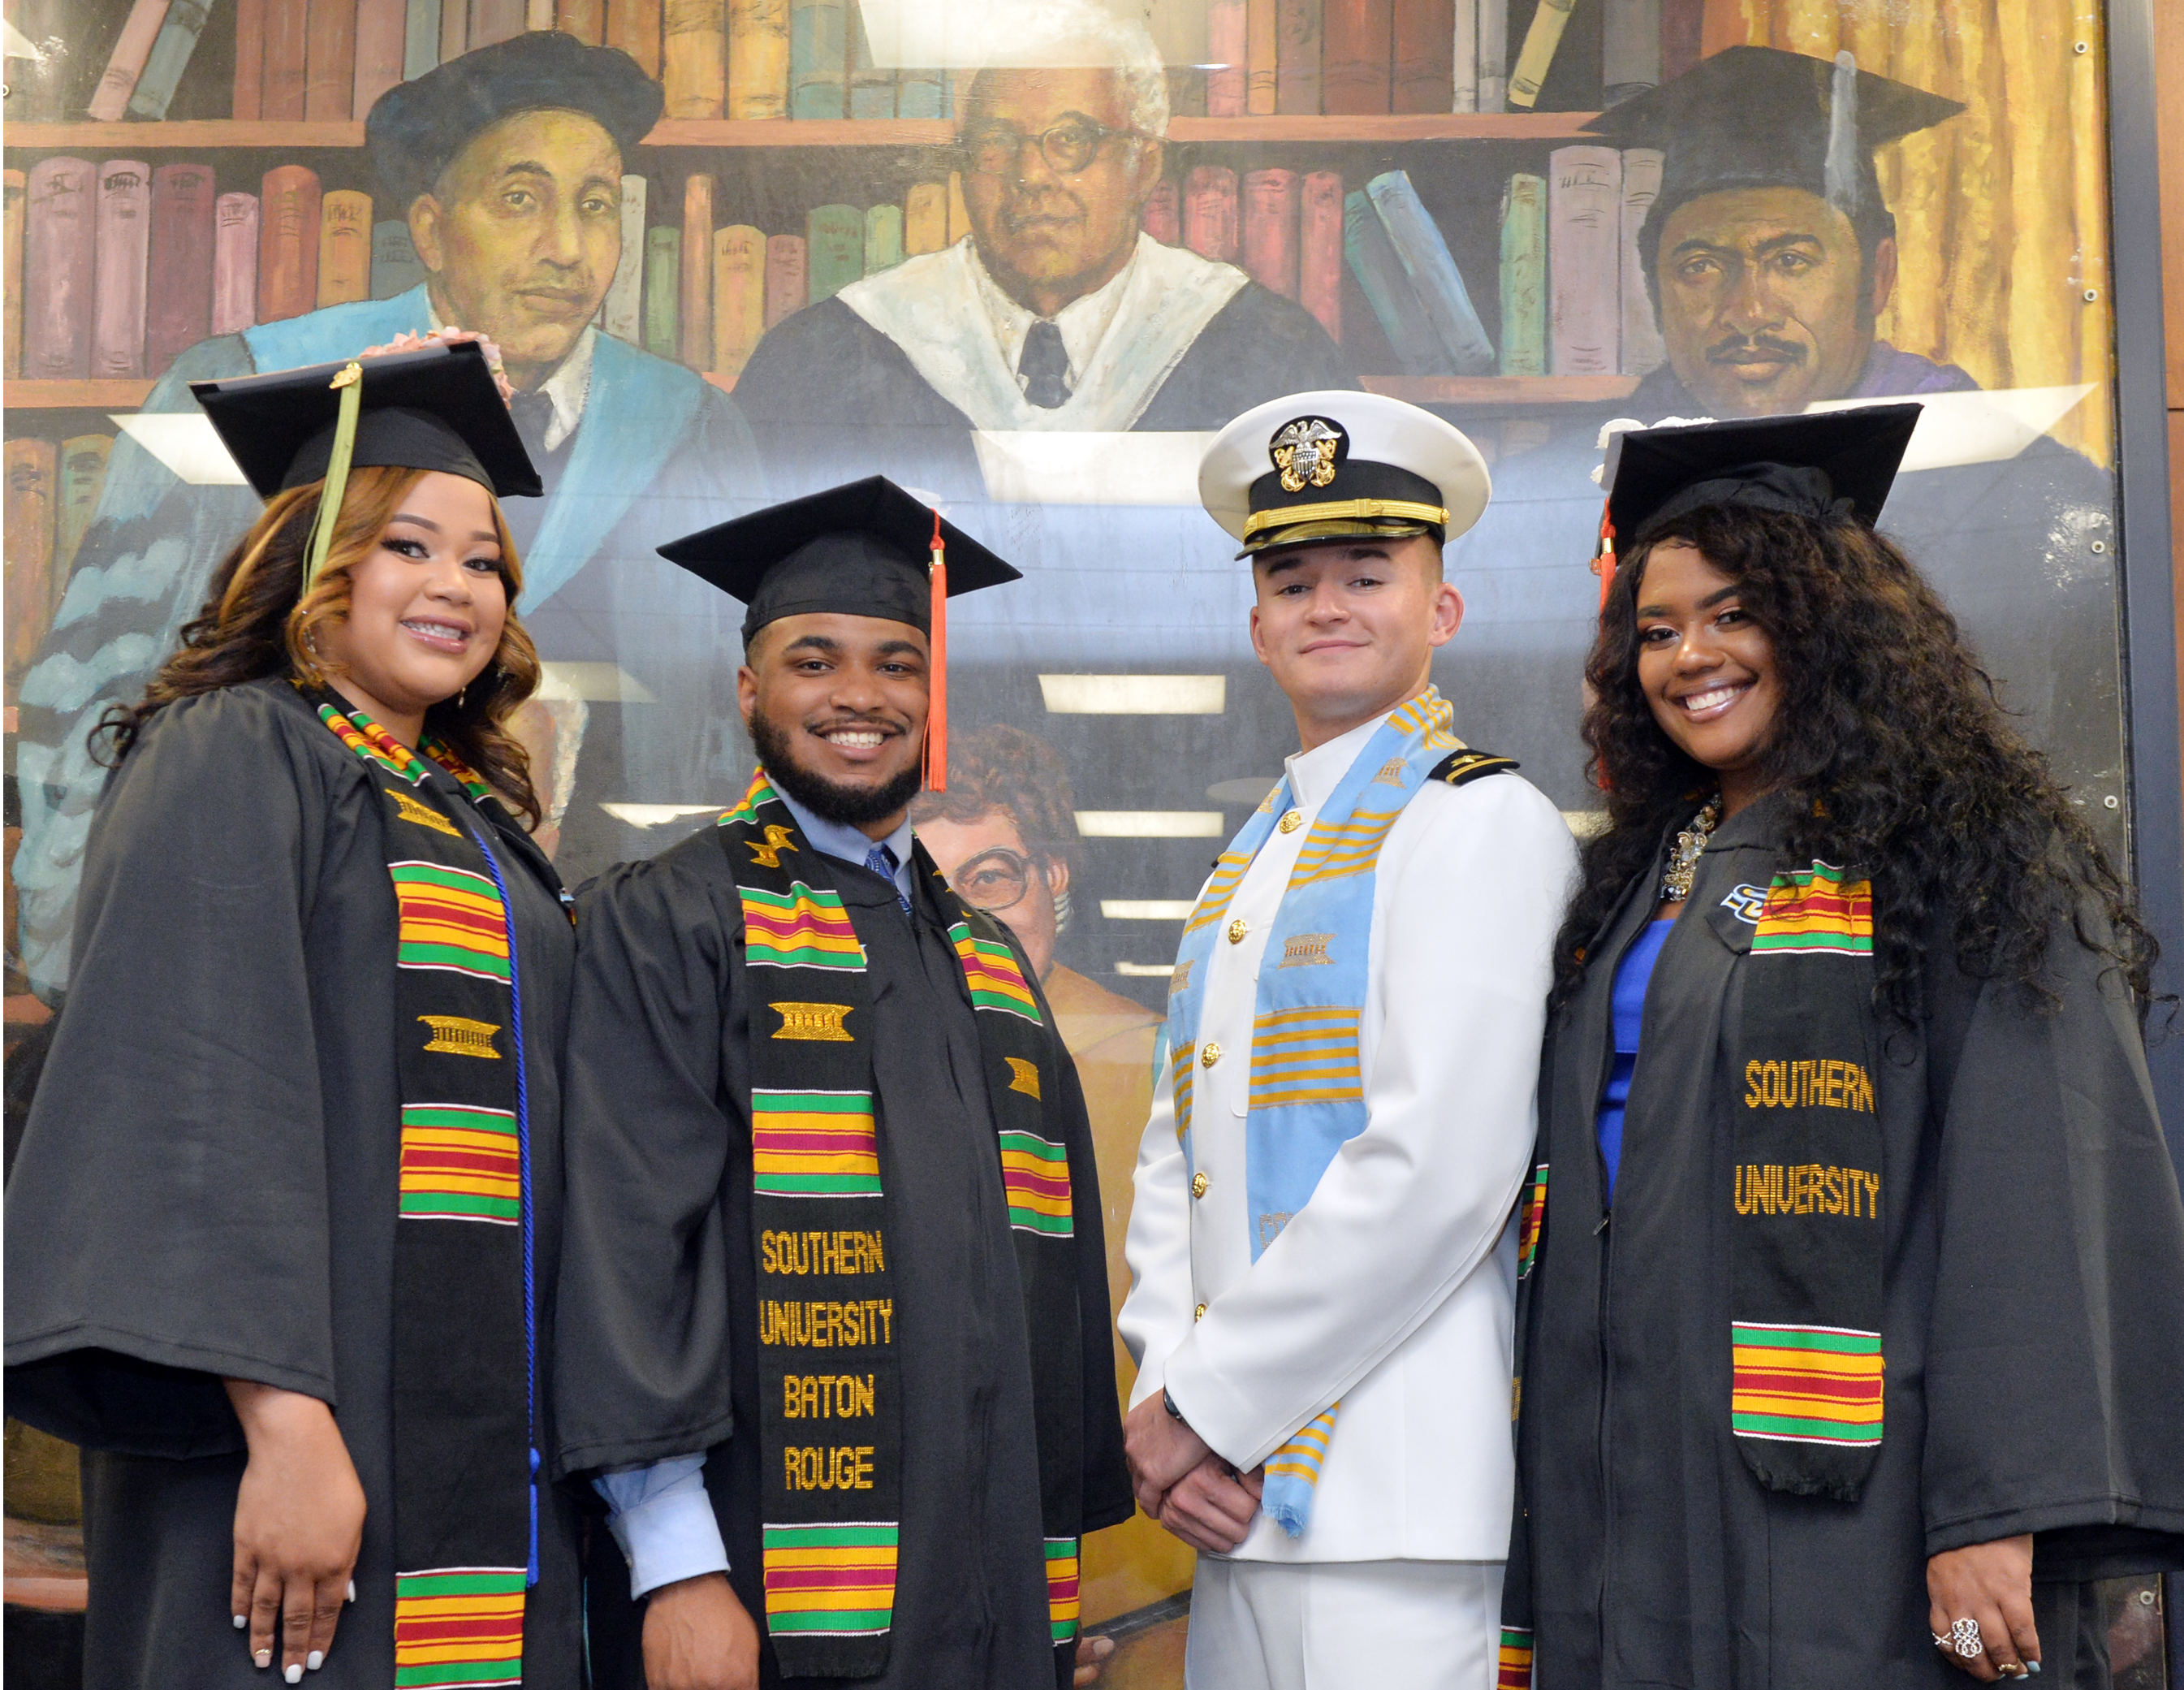 SU Students in regalia and NROTC graduate at commencement ceremony